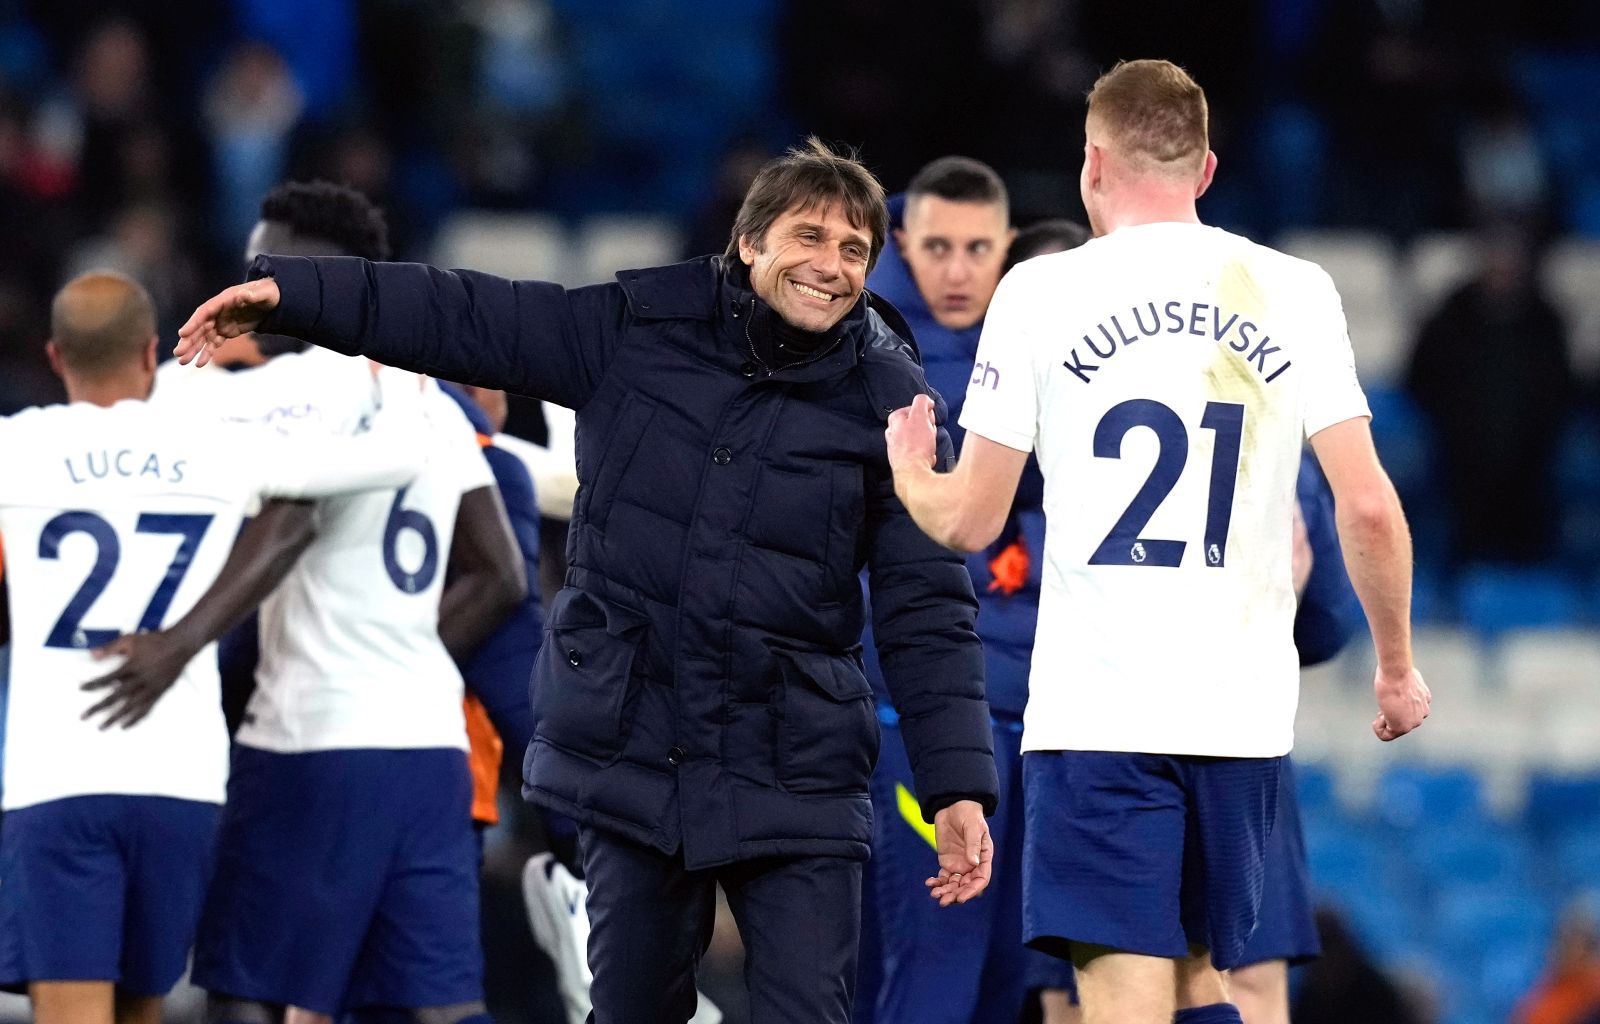 epa09772922 Tottenham manager Antonio Conte (C) celebrates with his players after winning the English Premier League soccer match between Manchester City and Tottenham Hotspur in Manchester, Britain, 19 February 2022.  EPA/ANDREW YATES EDITORIAL USE ONLY. No use with unauthorized audio, video, data, fixture lists, club/league logos or 'live' services. Online in-match use limited to 120 images, no video emulation. No use in betting, games or single club/league/player publications